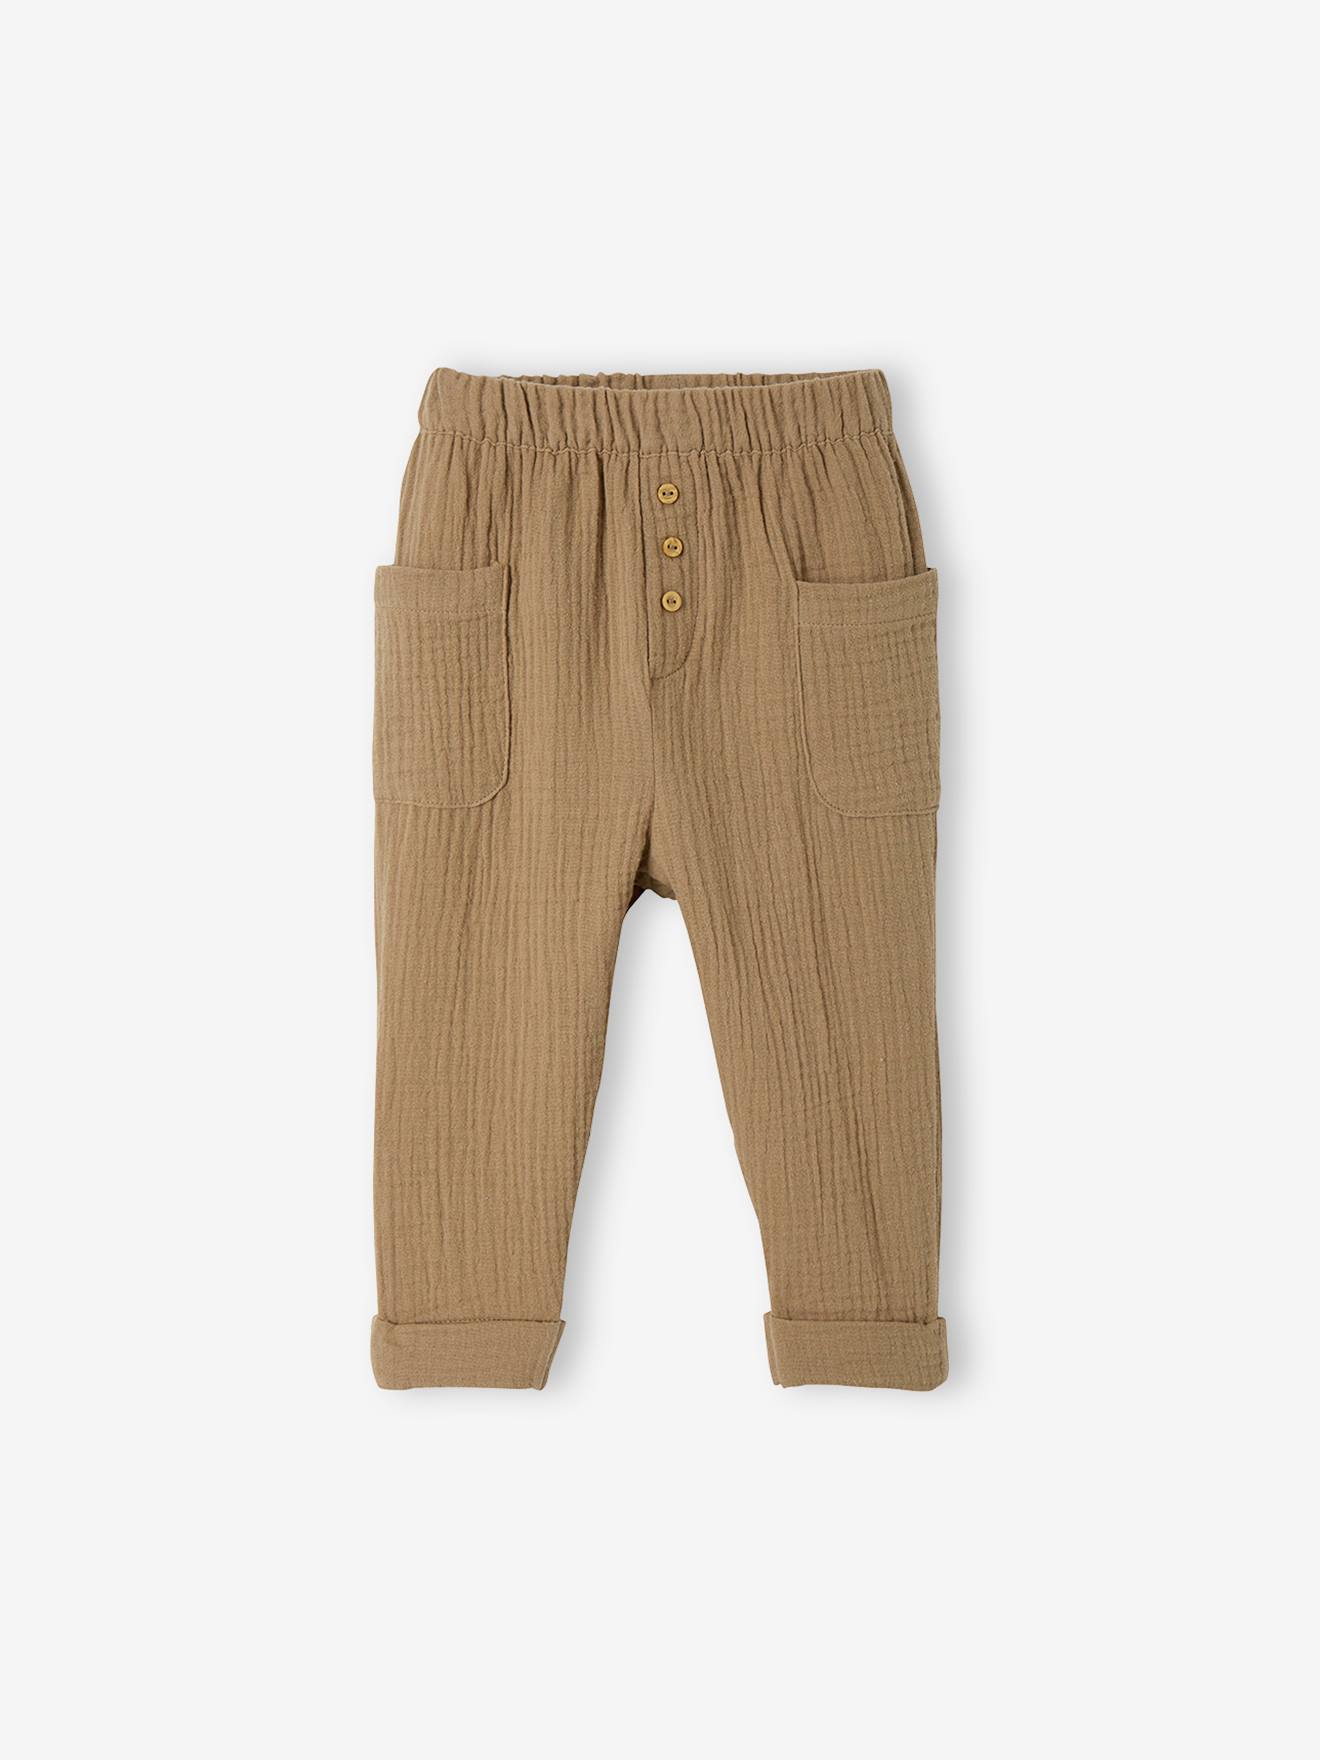 100% Cotton Baby Boy Solid Harem Pants with Pockets